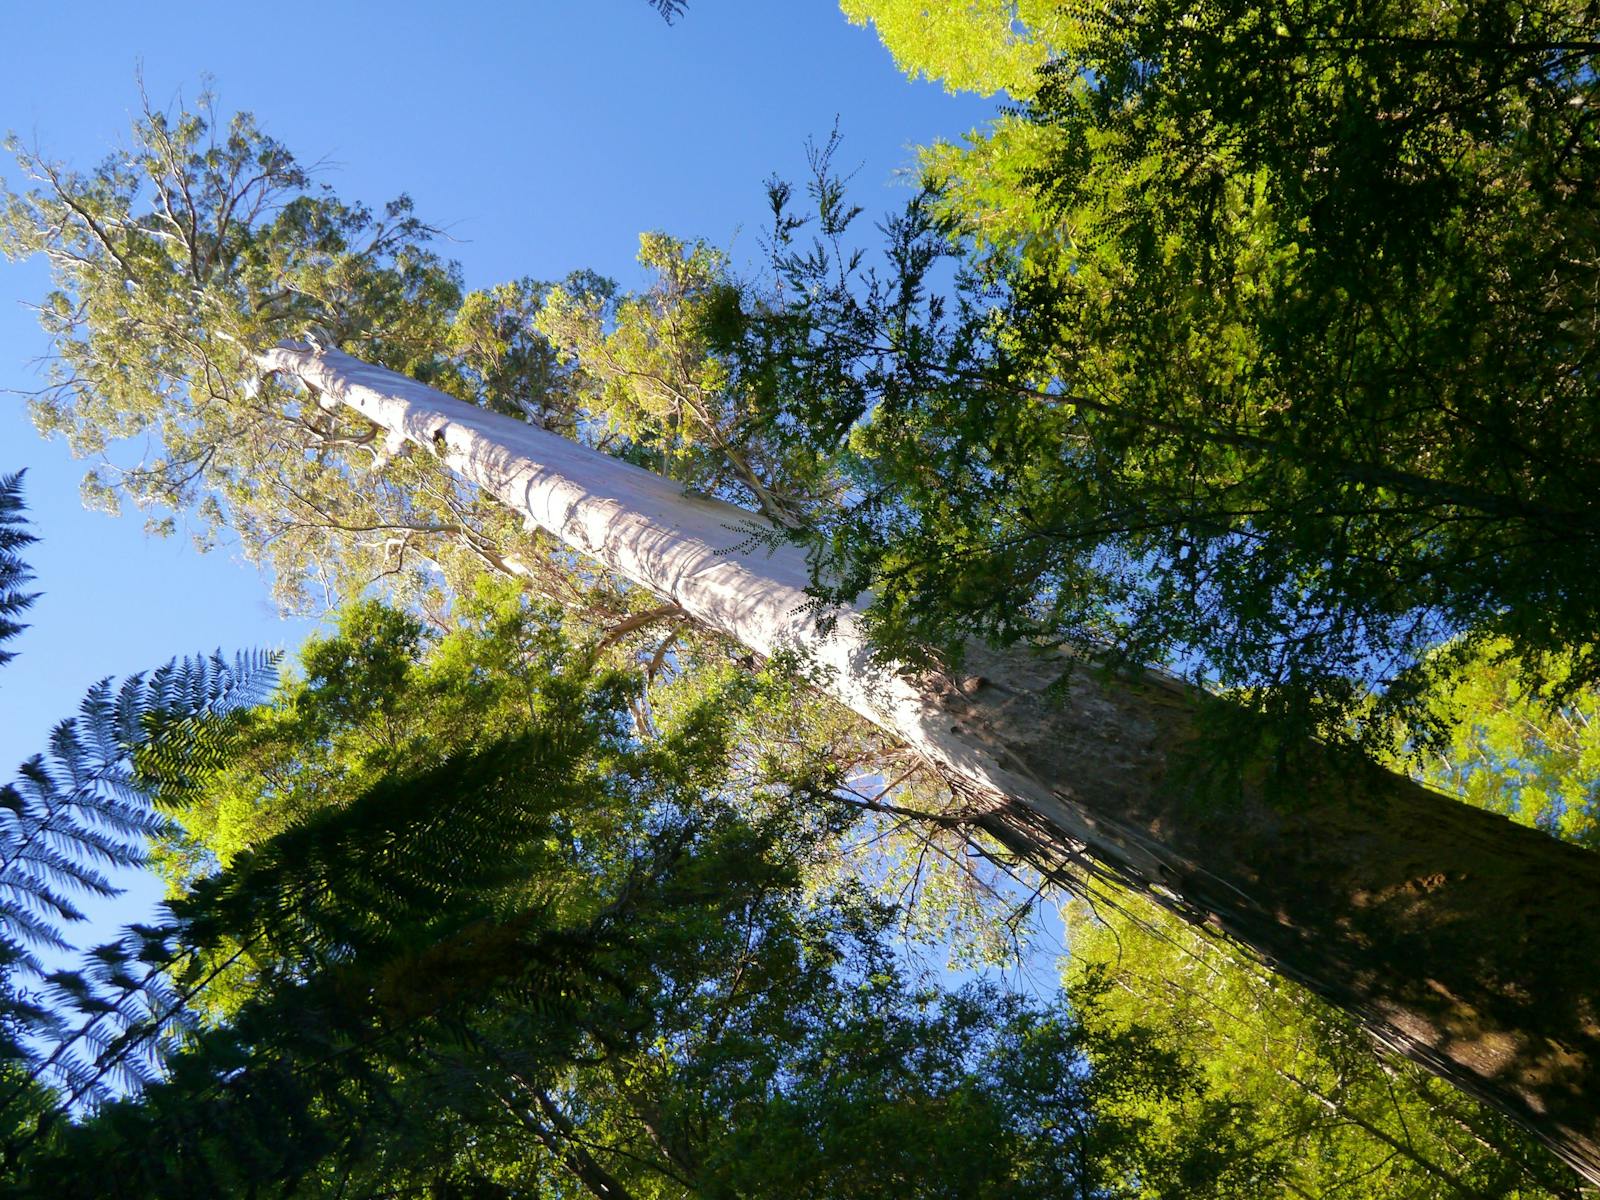 A Styx Valley giant Eucalyptus reaching for the sky